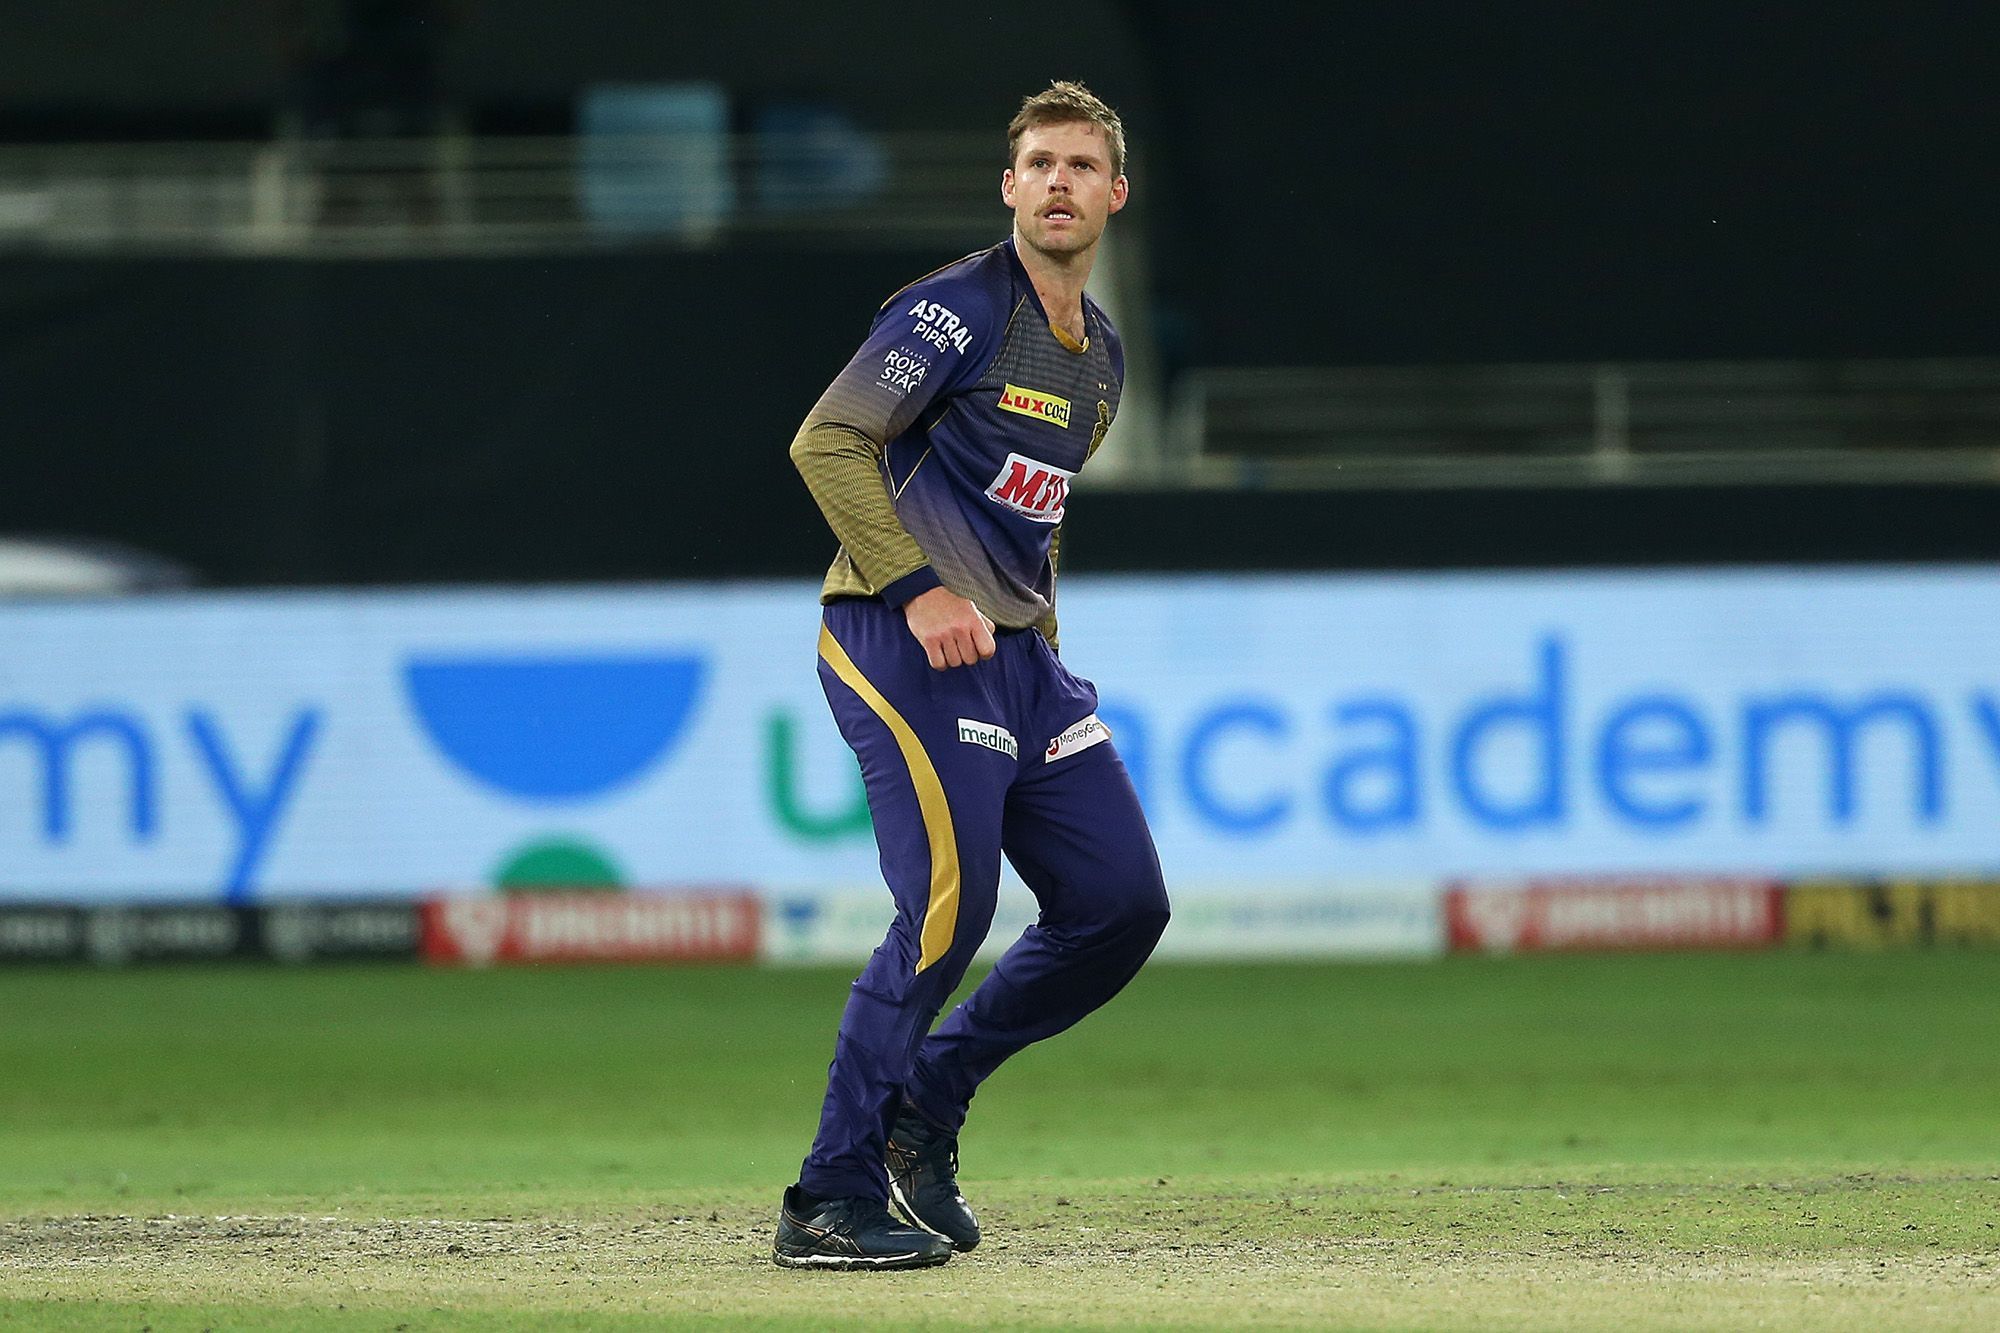 IPL 2020 | KKR bowlers gave everything, just strayed a bit on execution, says Eoin Morgan